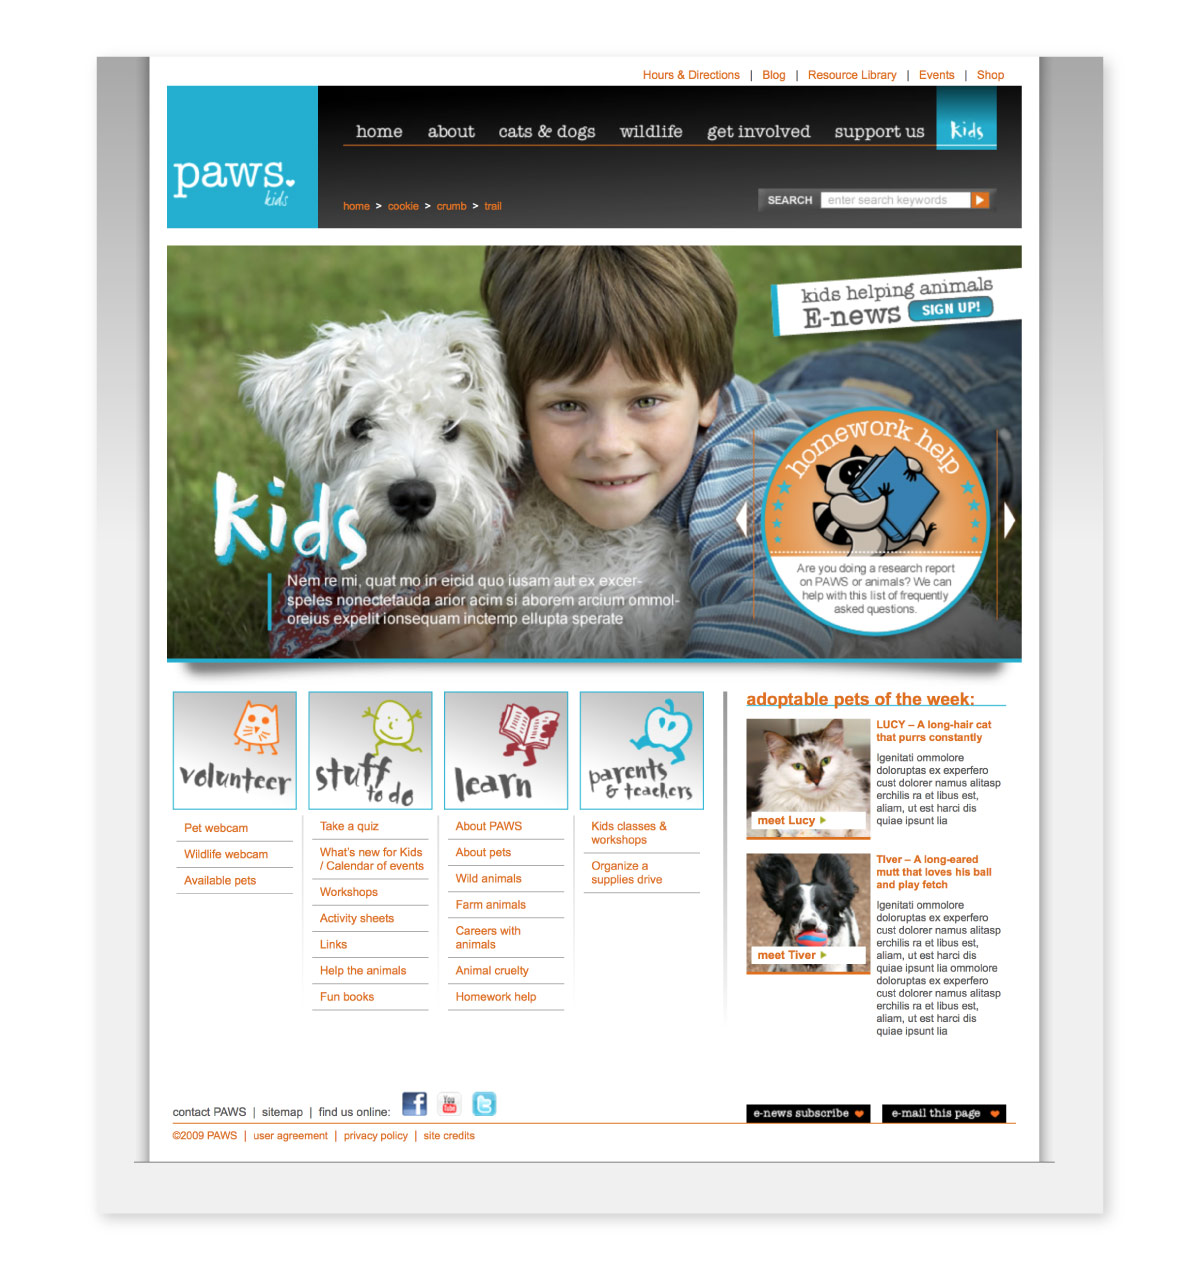 PAWS website interior page